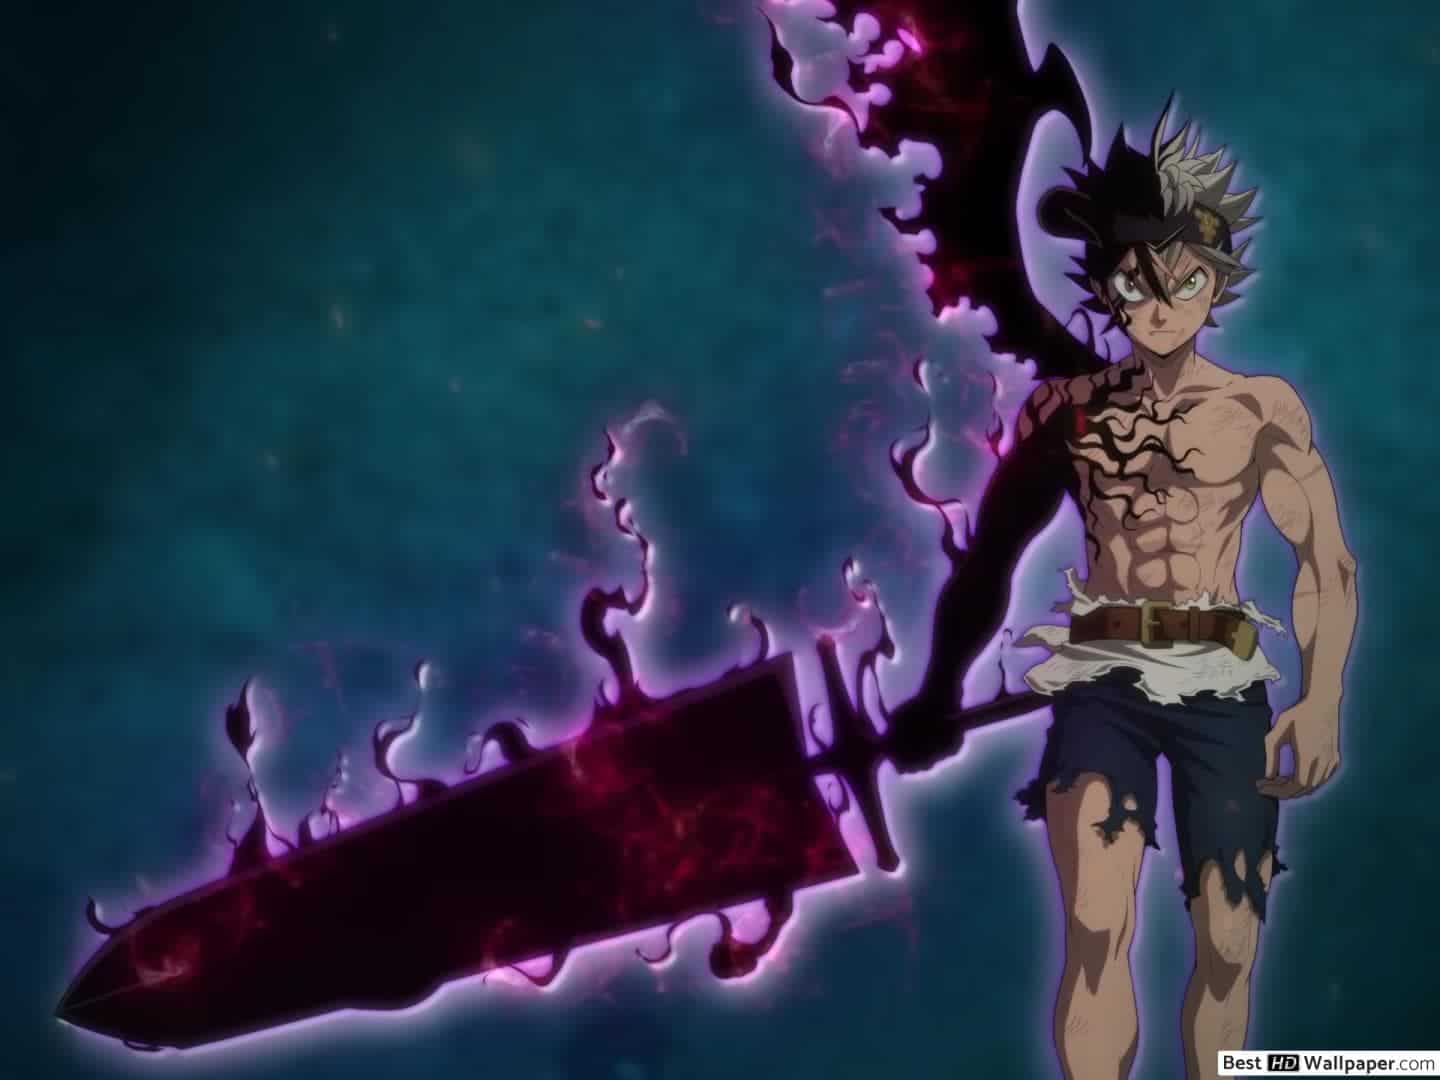 Black Clover: A Jumble Of Theories And Ideas Crammed Into A Post